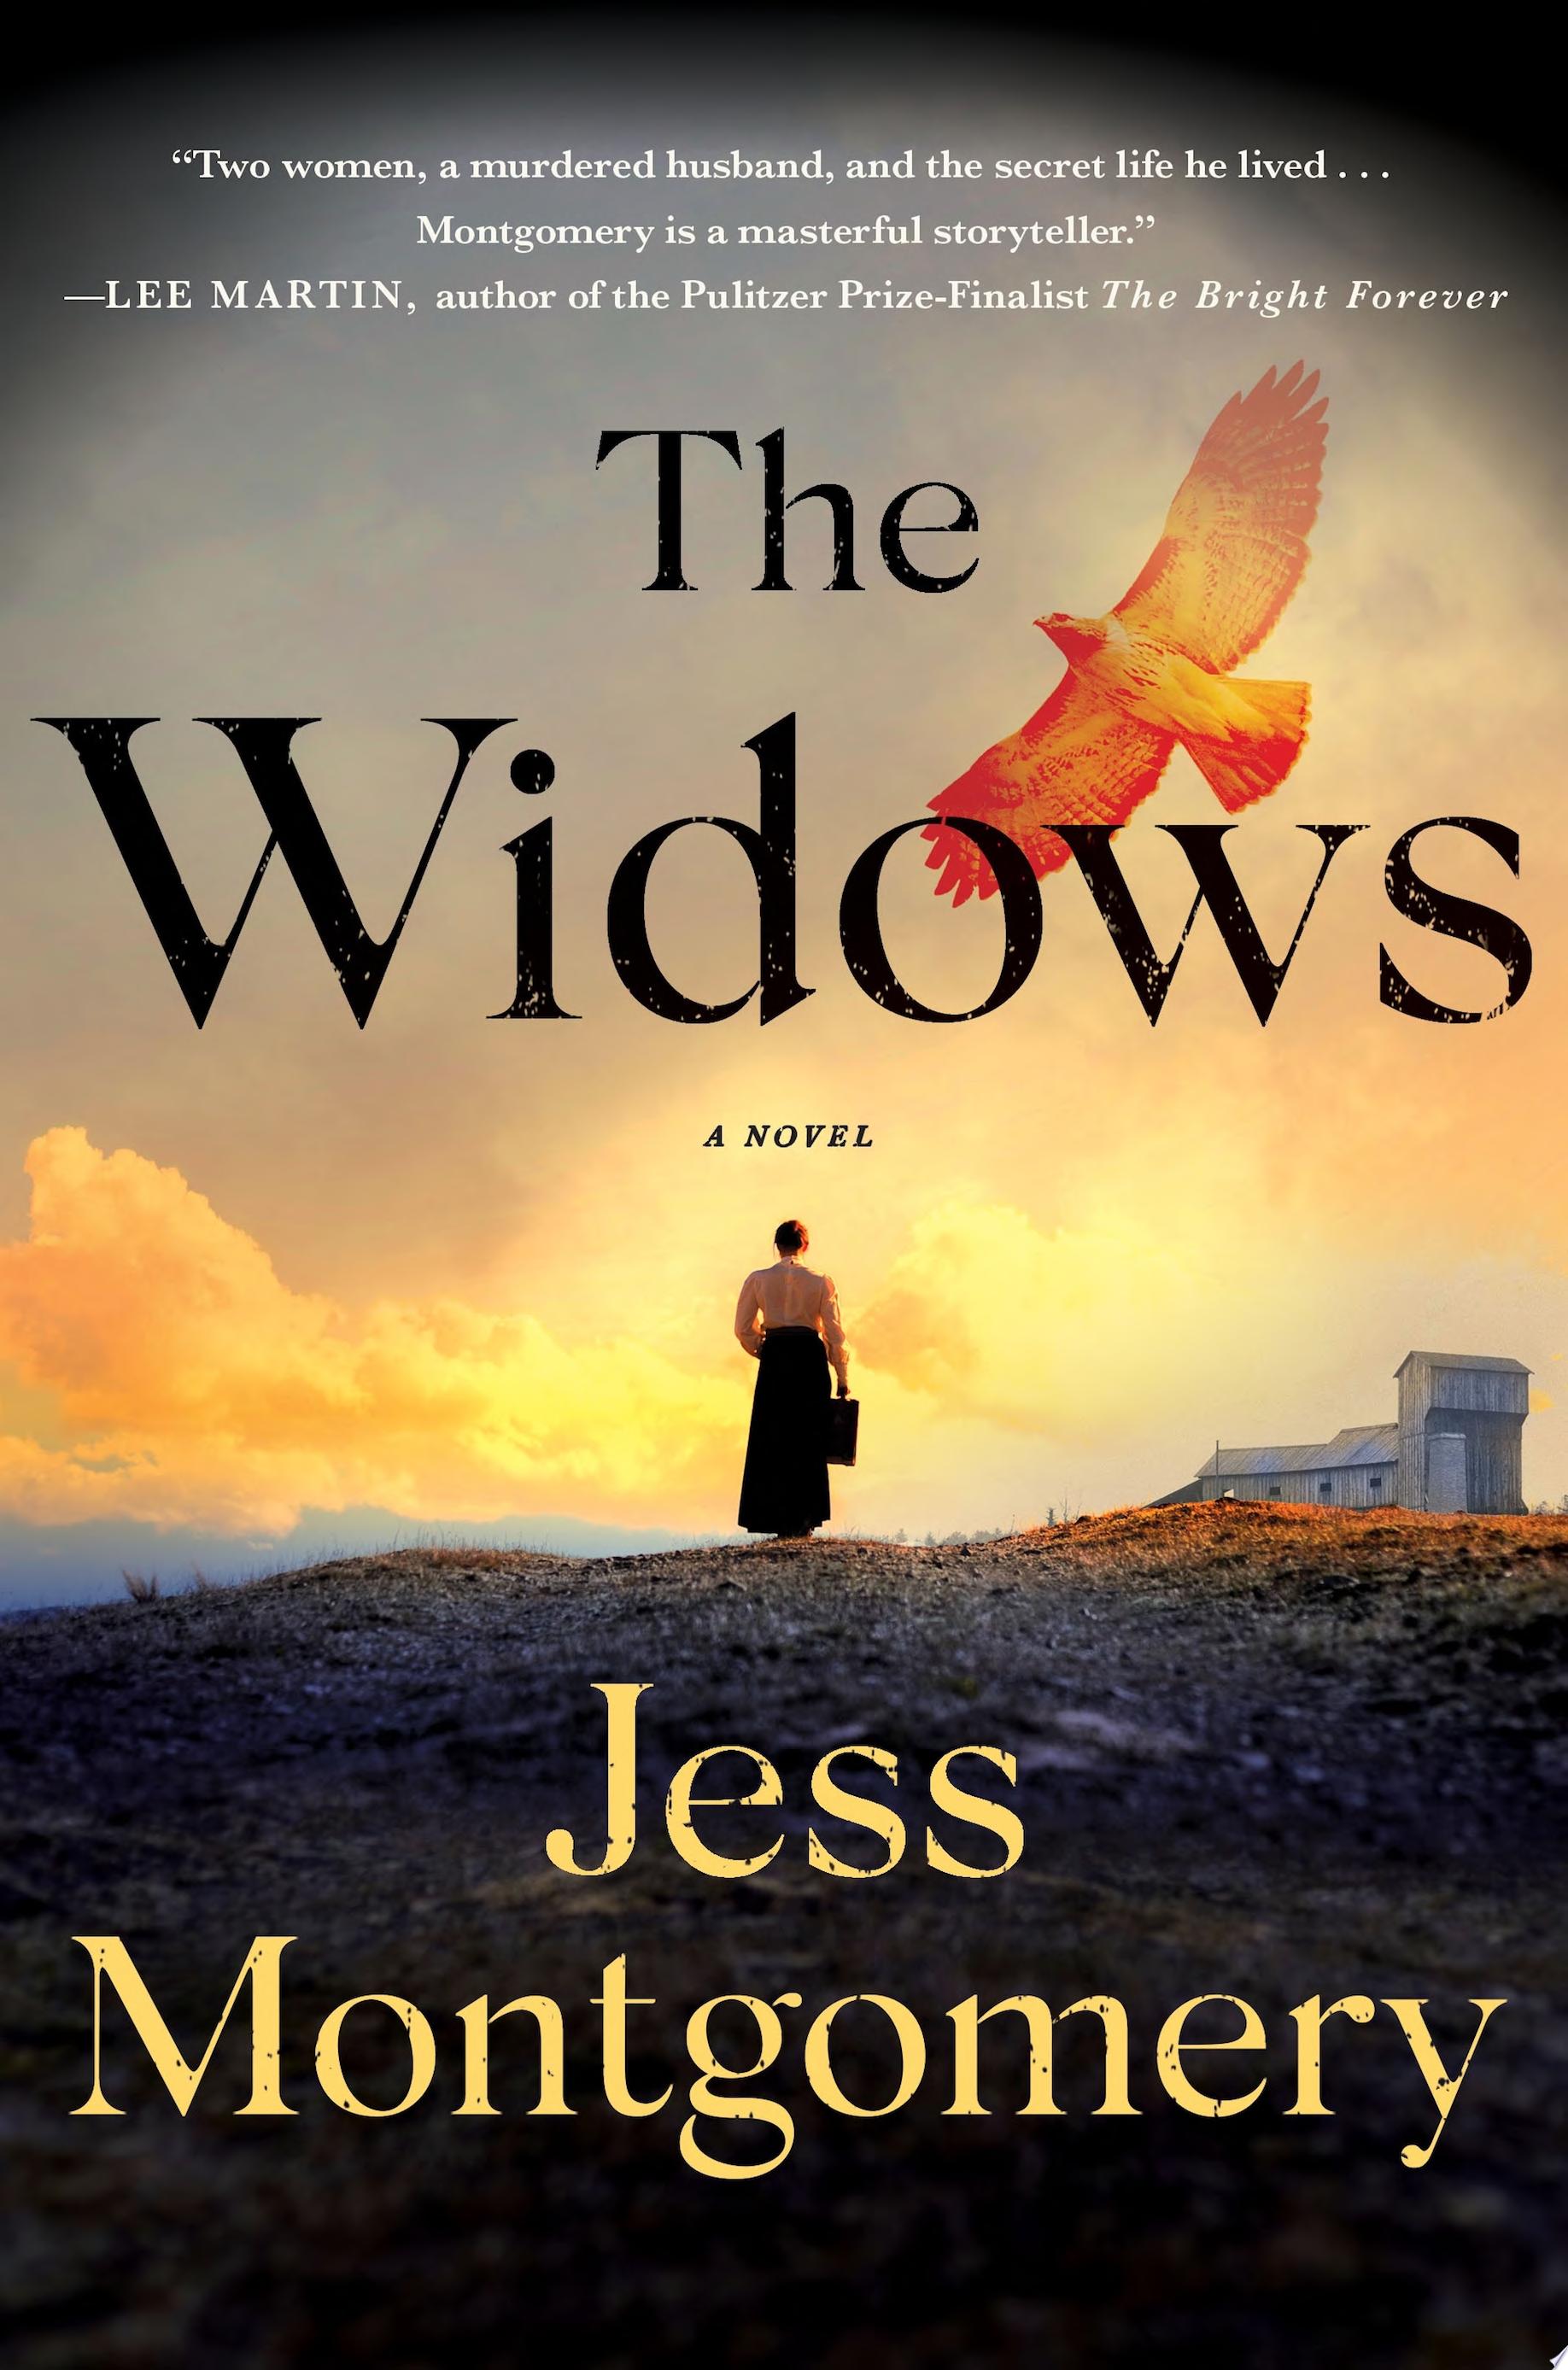 Image for "The Widows"